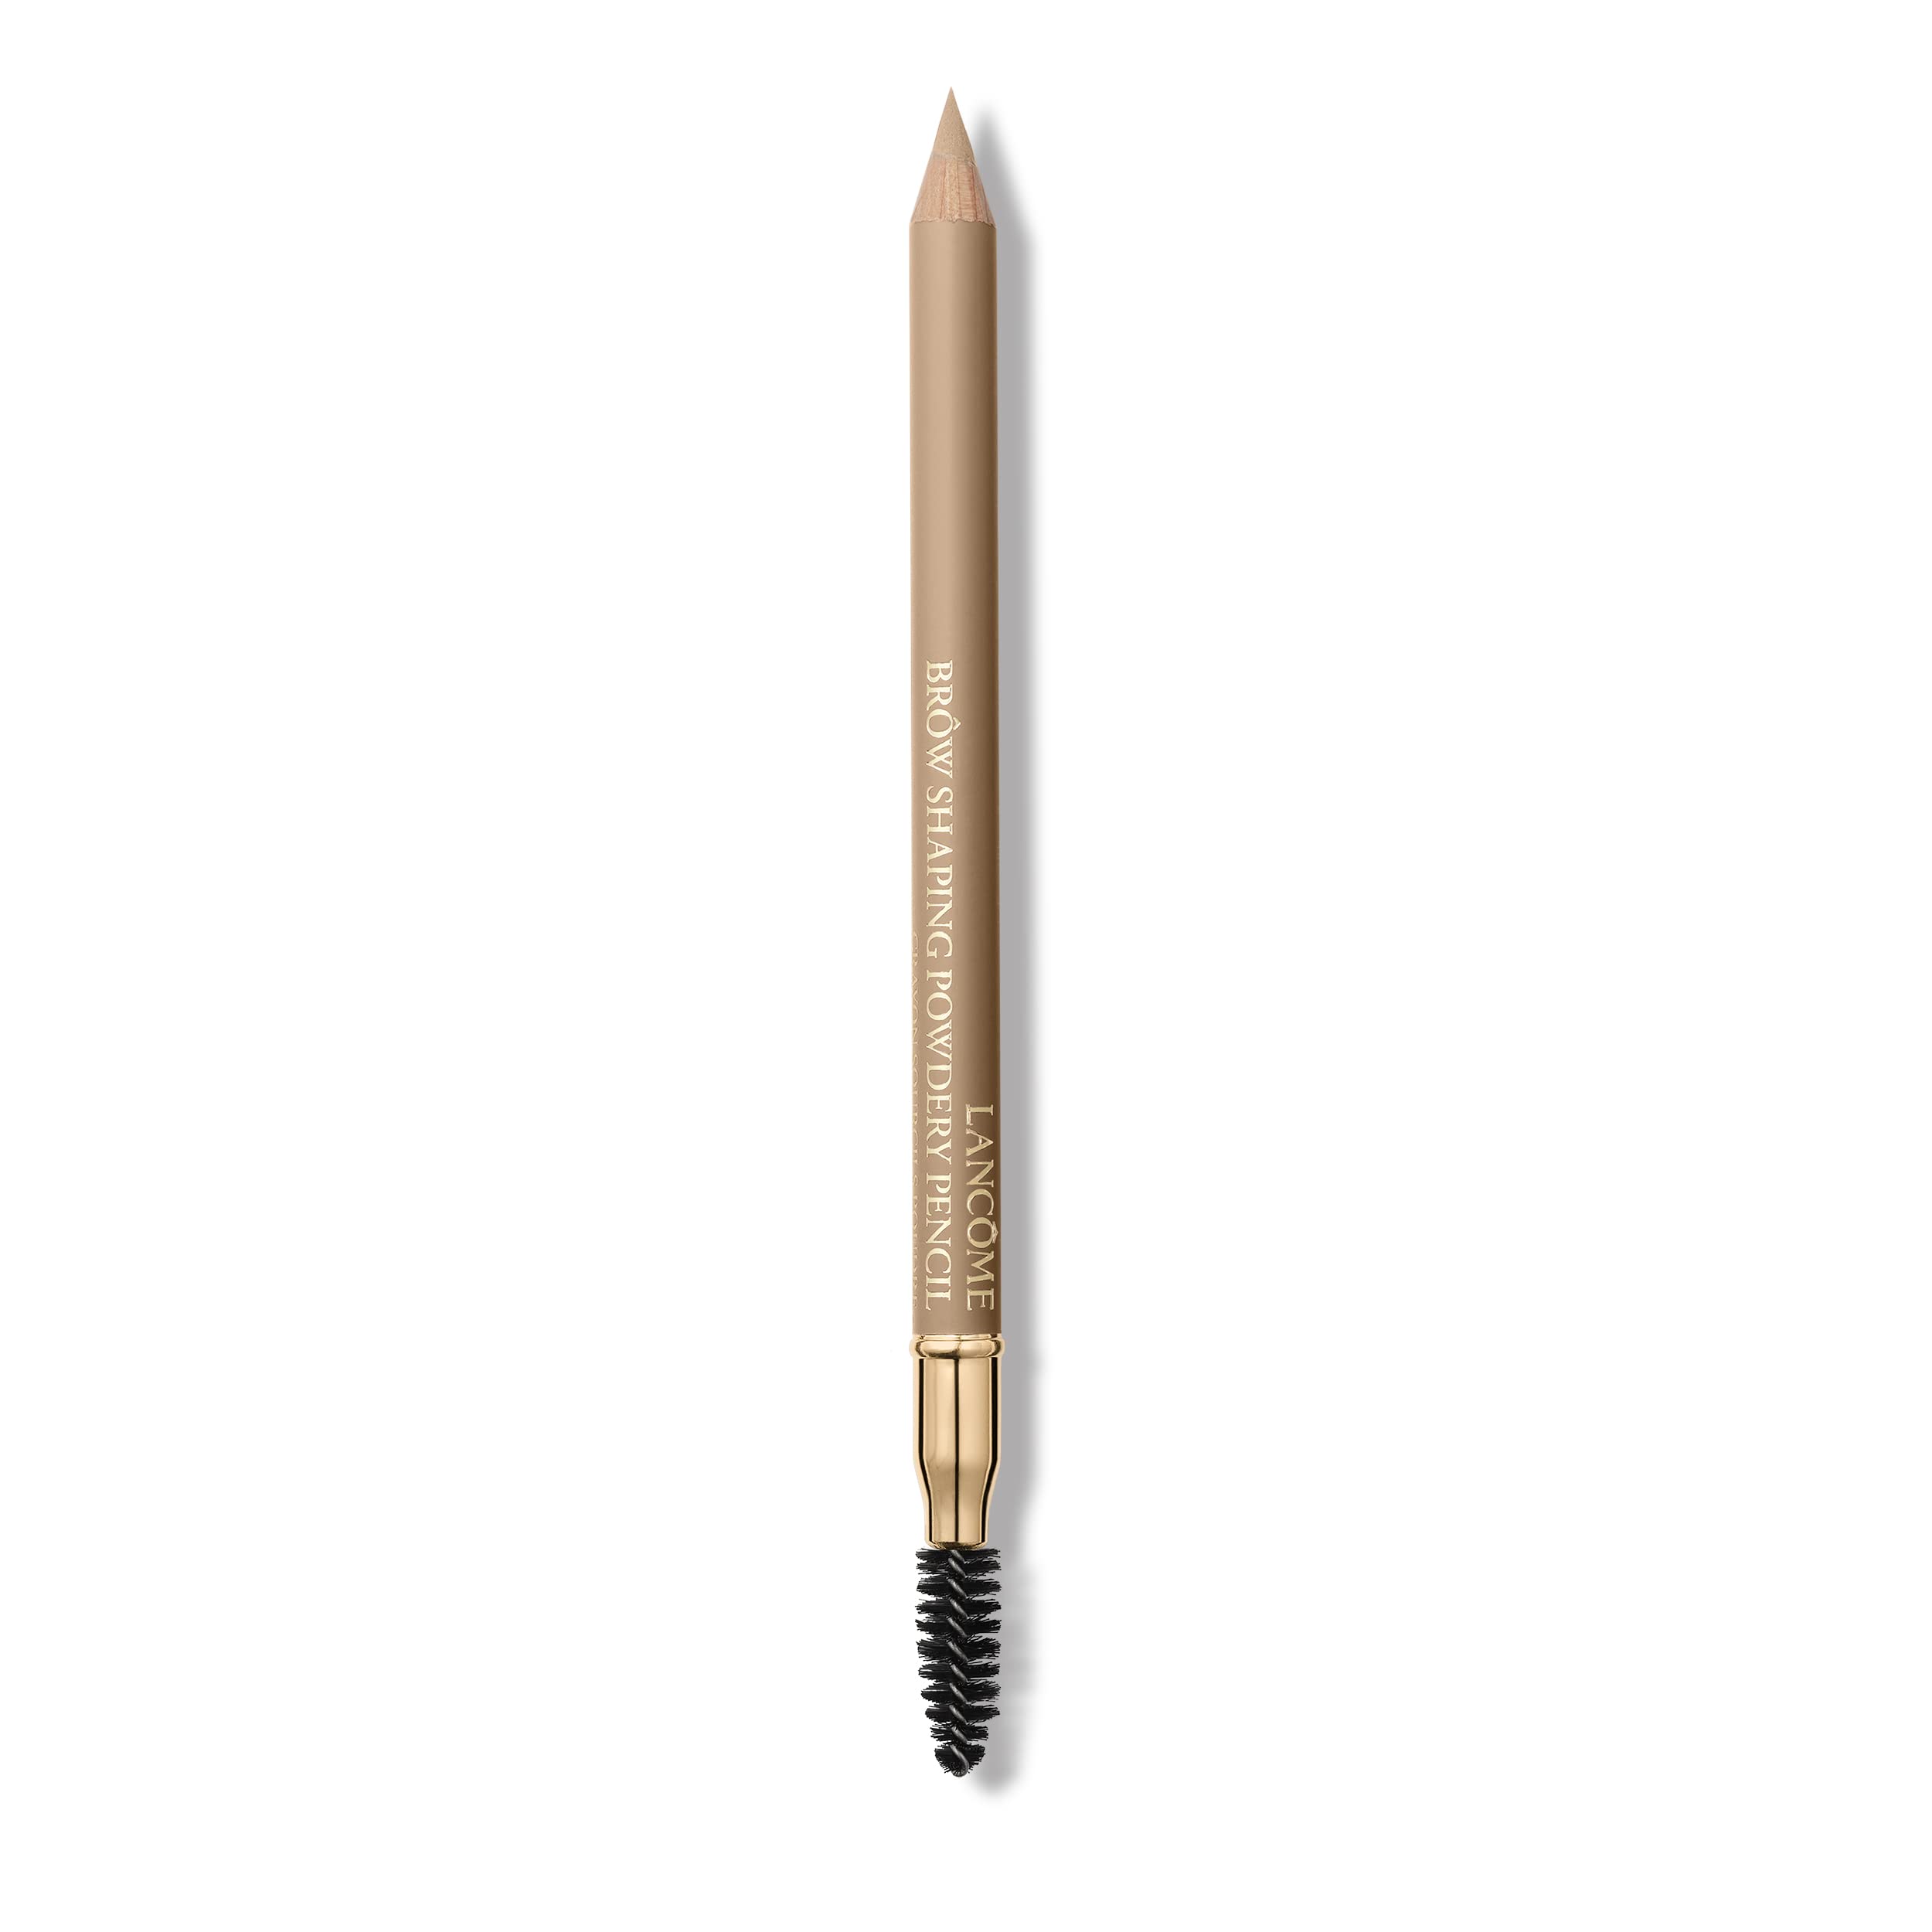 Lanc Me Brow Shaping Powdery Pencil Eyebrow Makeup For Defined And Natural Look 02 Dark Blonde